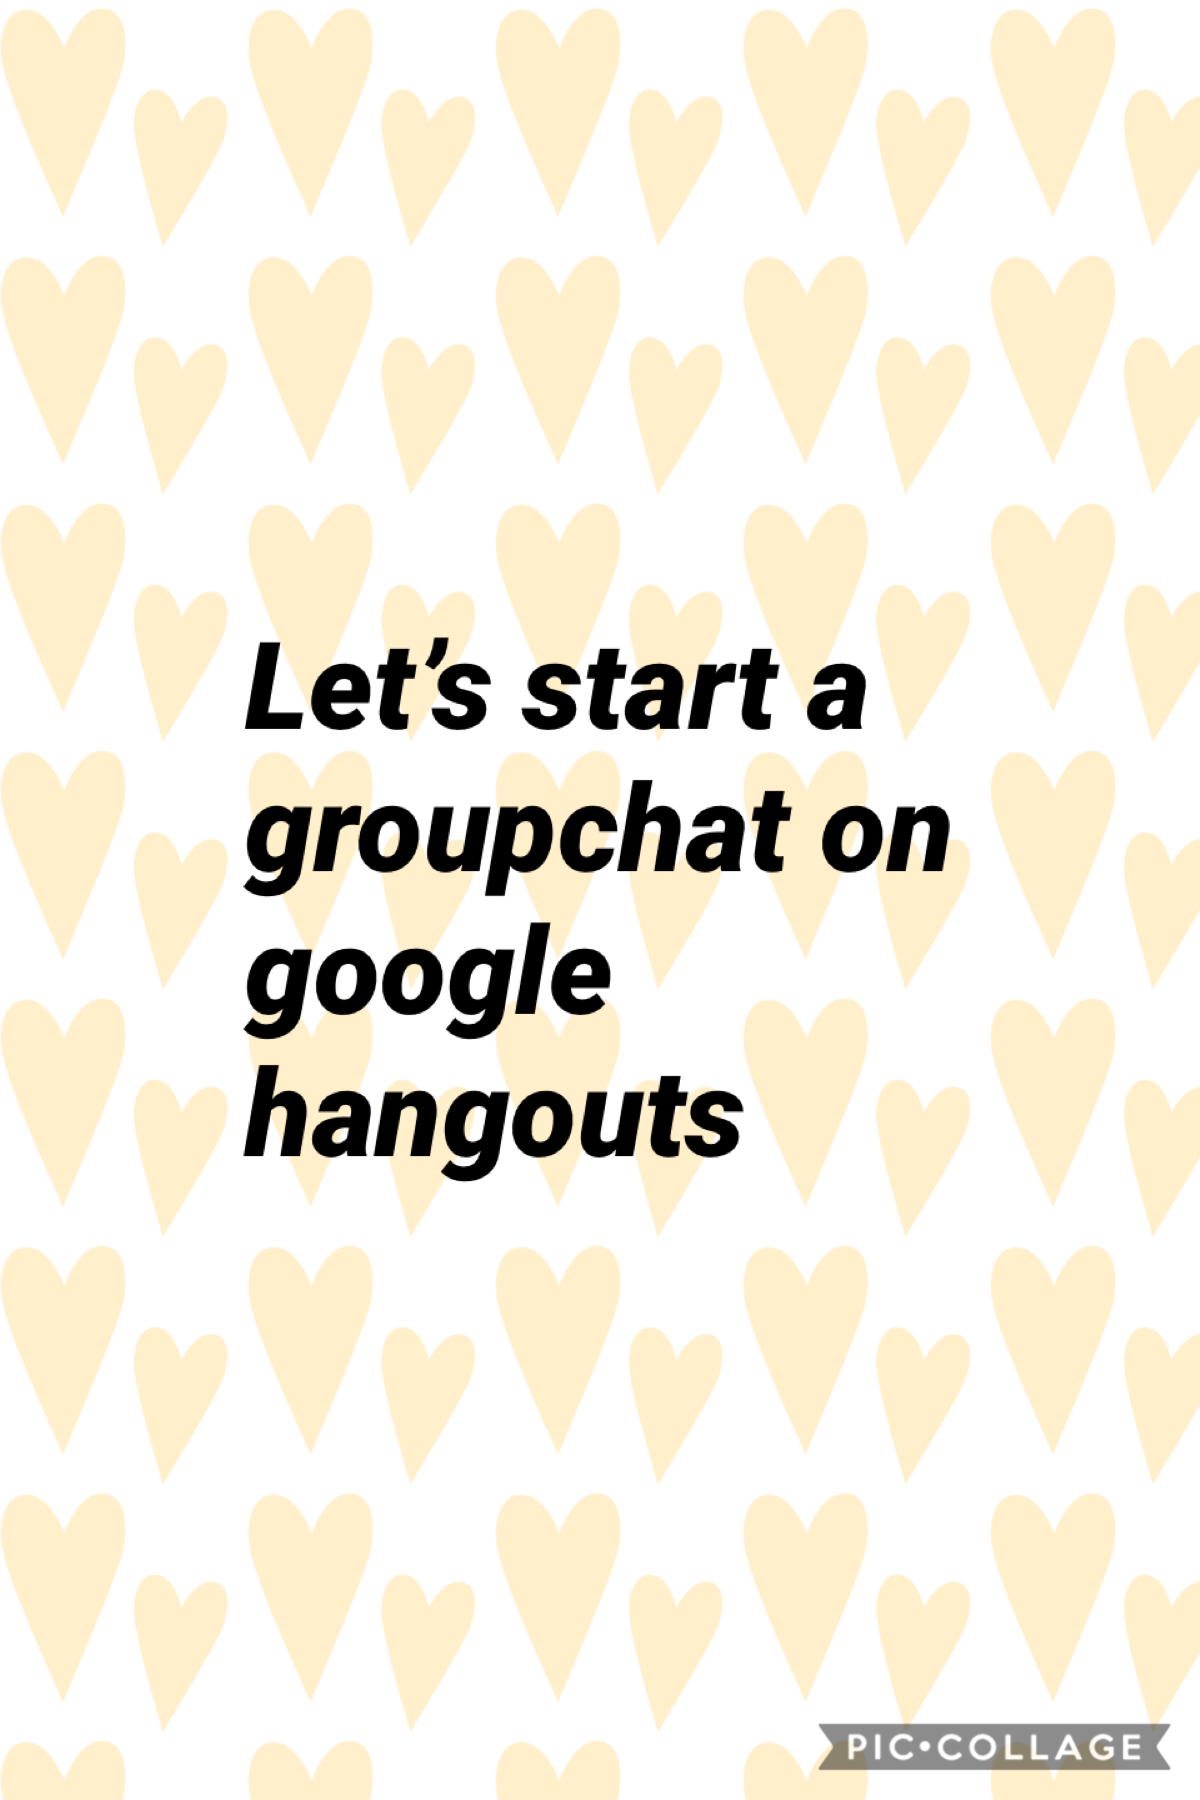 Let’s start a groupchat!! I am always looking to make some friends, sooo yeah my email is minonexistentlifegayboi@gmail.com